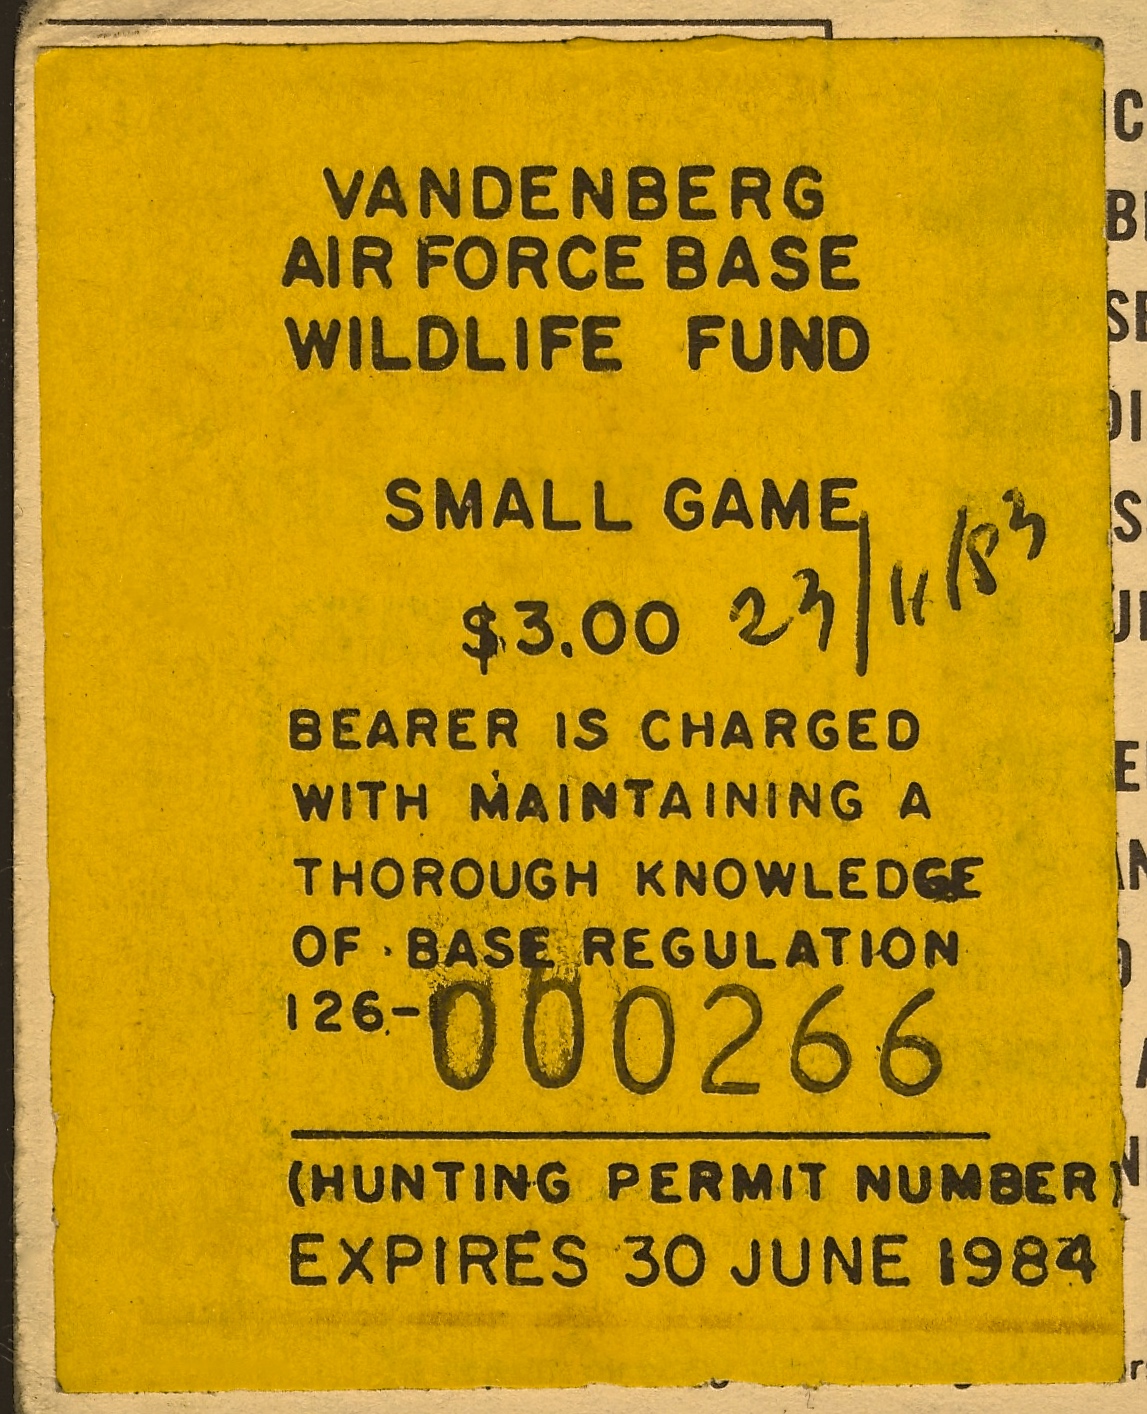 1983-84 VAFB Small Game